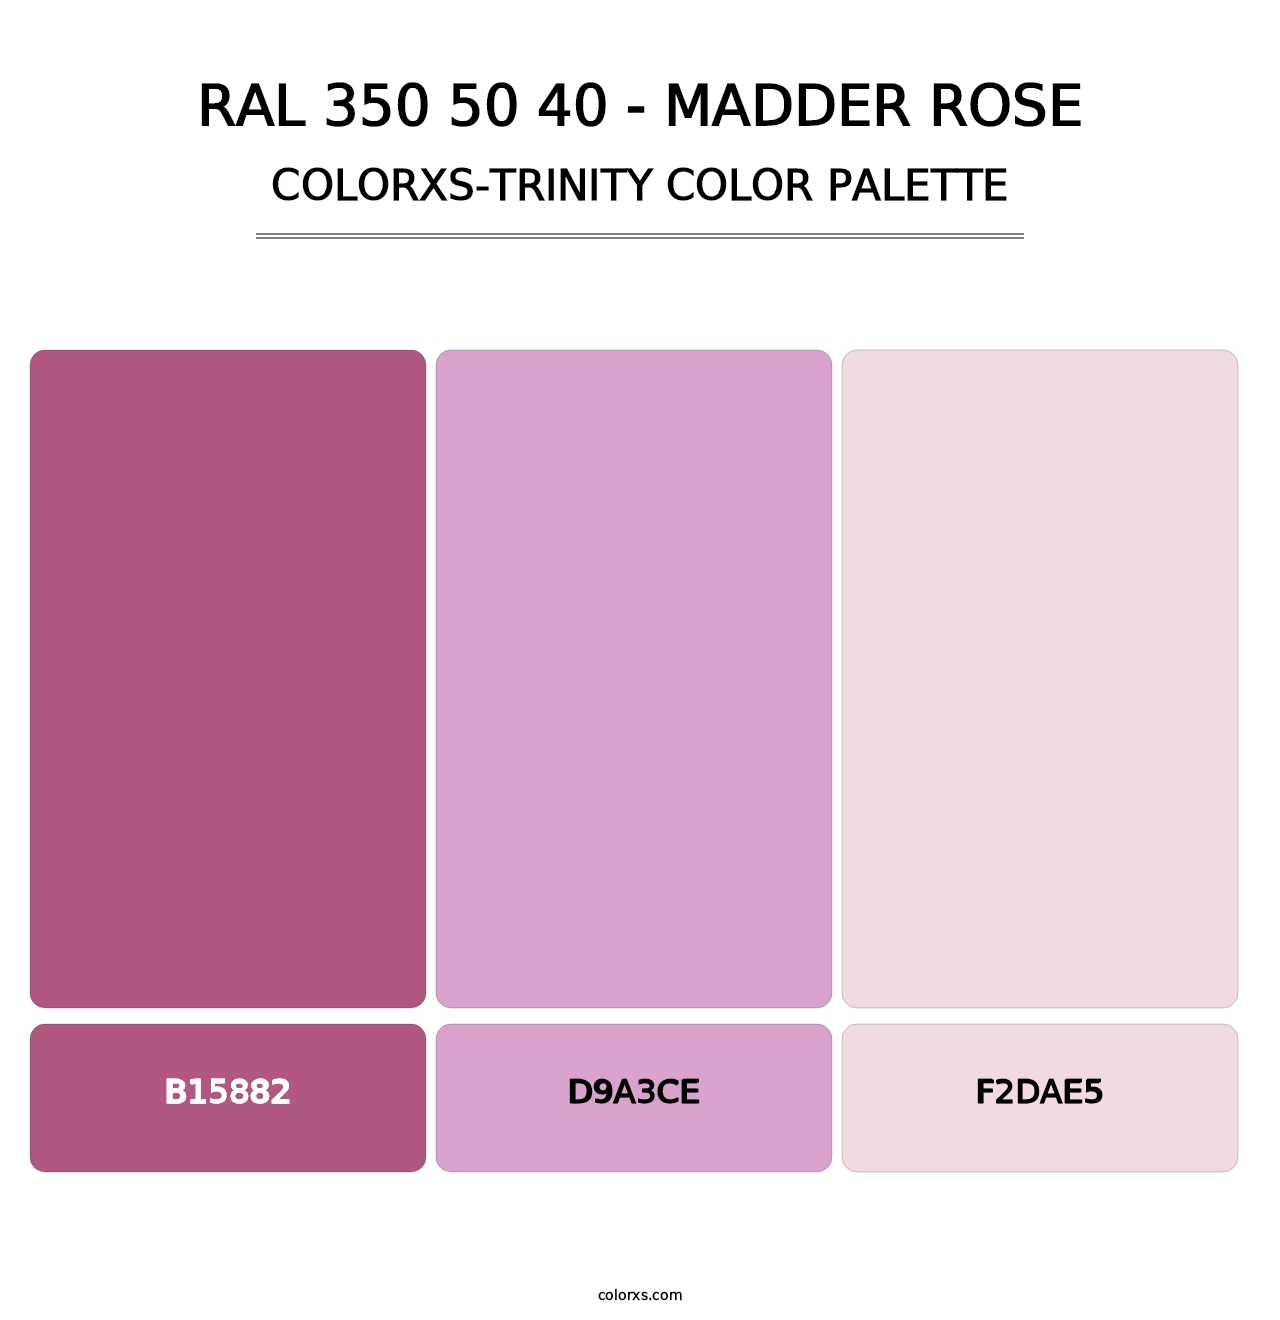 RAL 350 50 40 - Madder Rose - Colorxs Trinity Palette